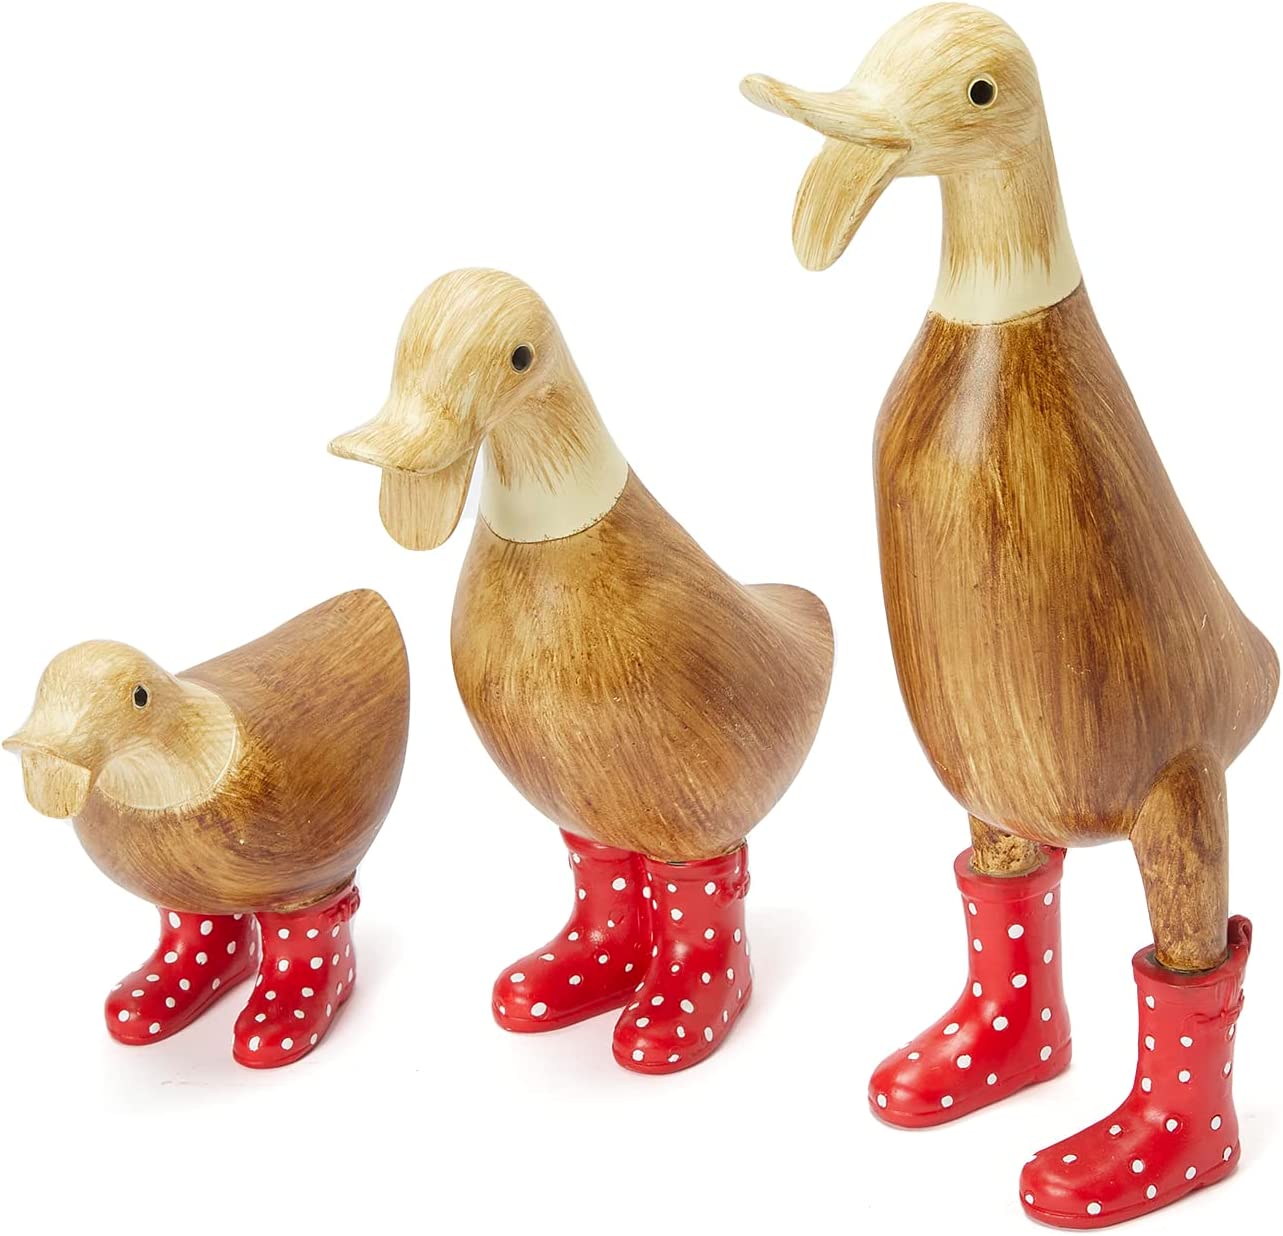 Garden ducks made of wood wearing spotted wellies on a white background.